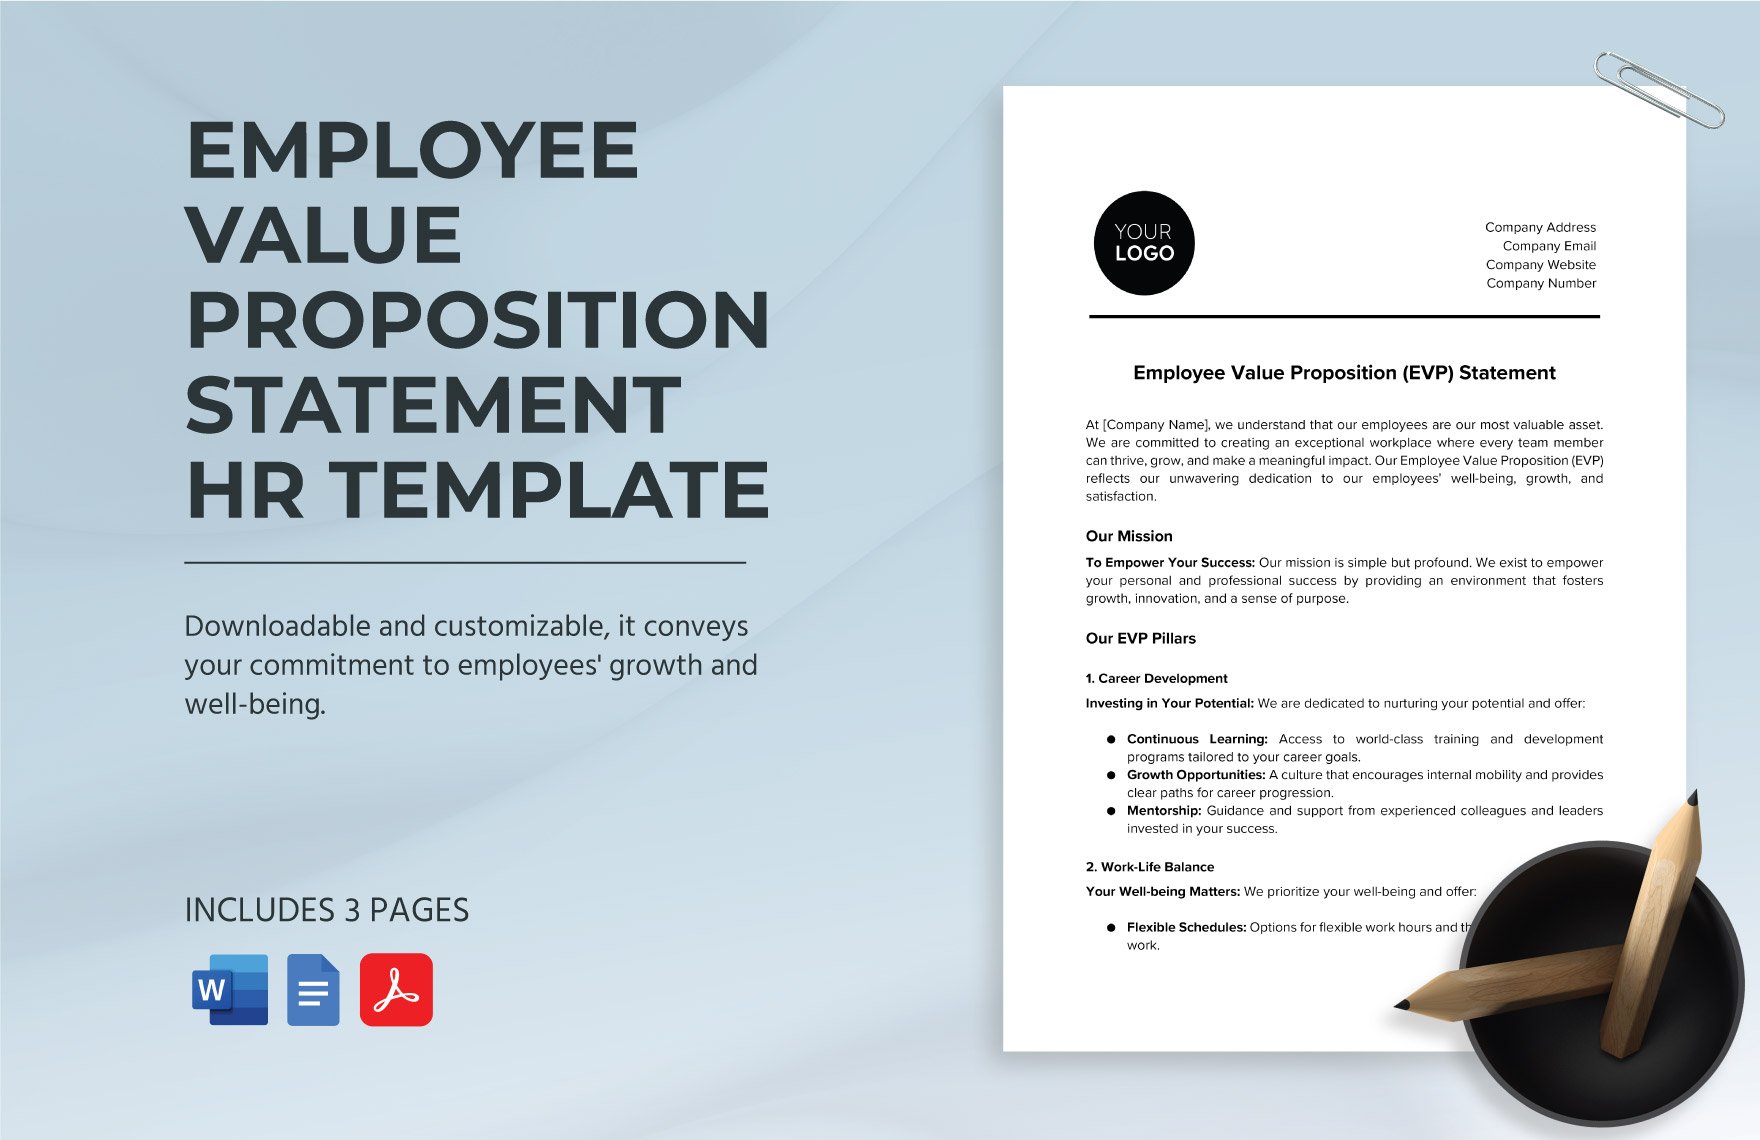 Employee Value Proposition Statement HR Template in Word, Google Docs, PDF